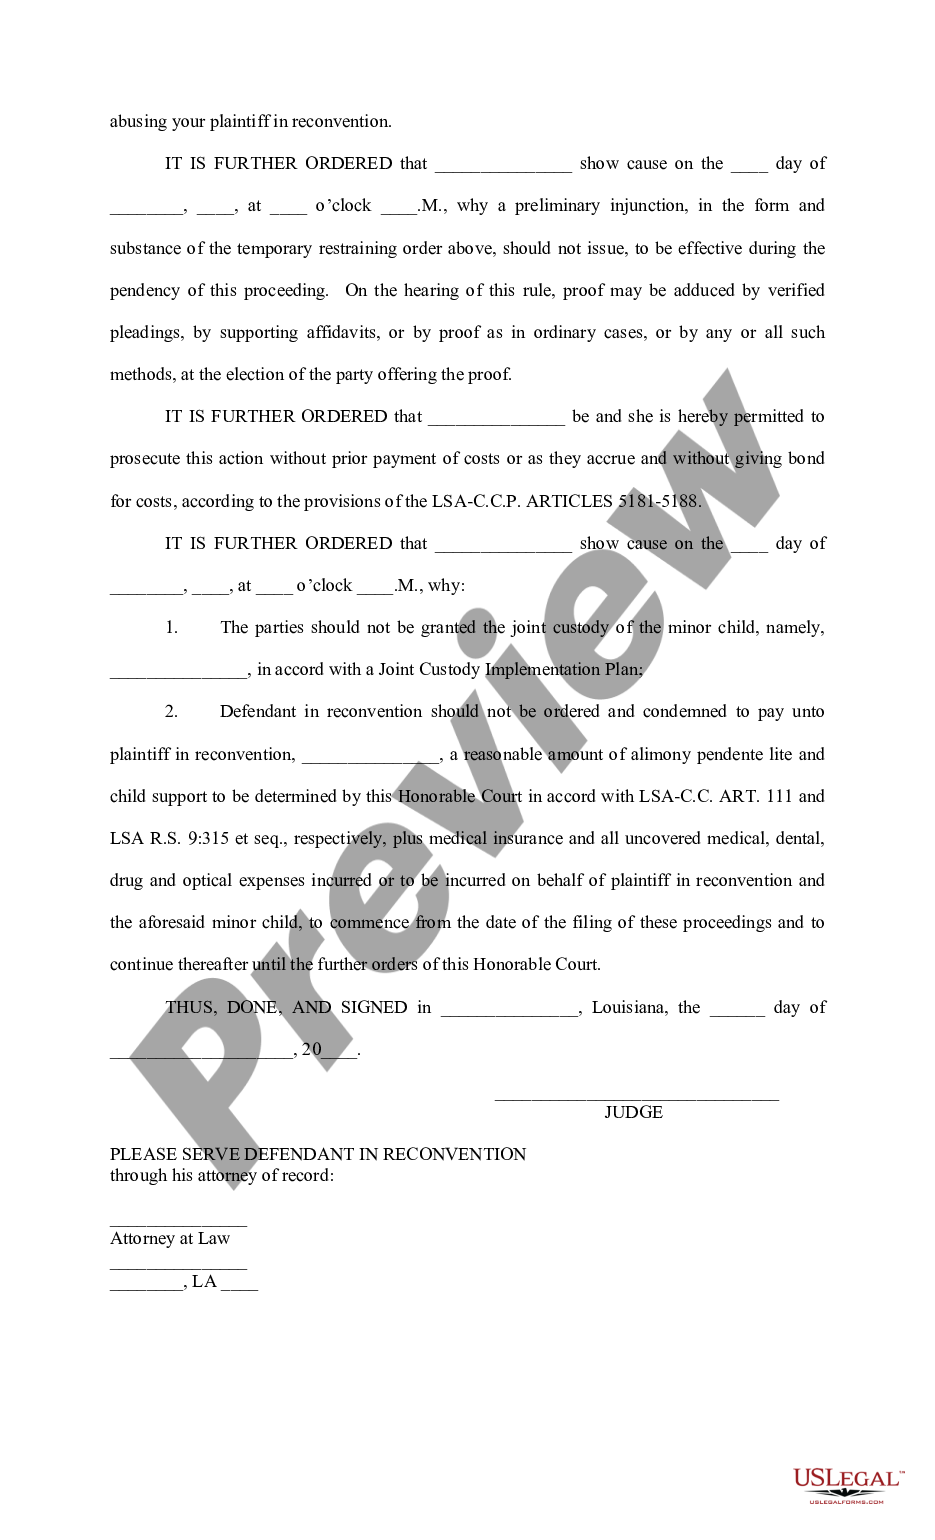 page 7 Answers to Original, First Amended, and Supplemental Petition and Reconventional Demand (Divorce) preview